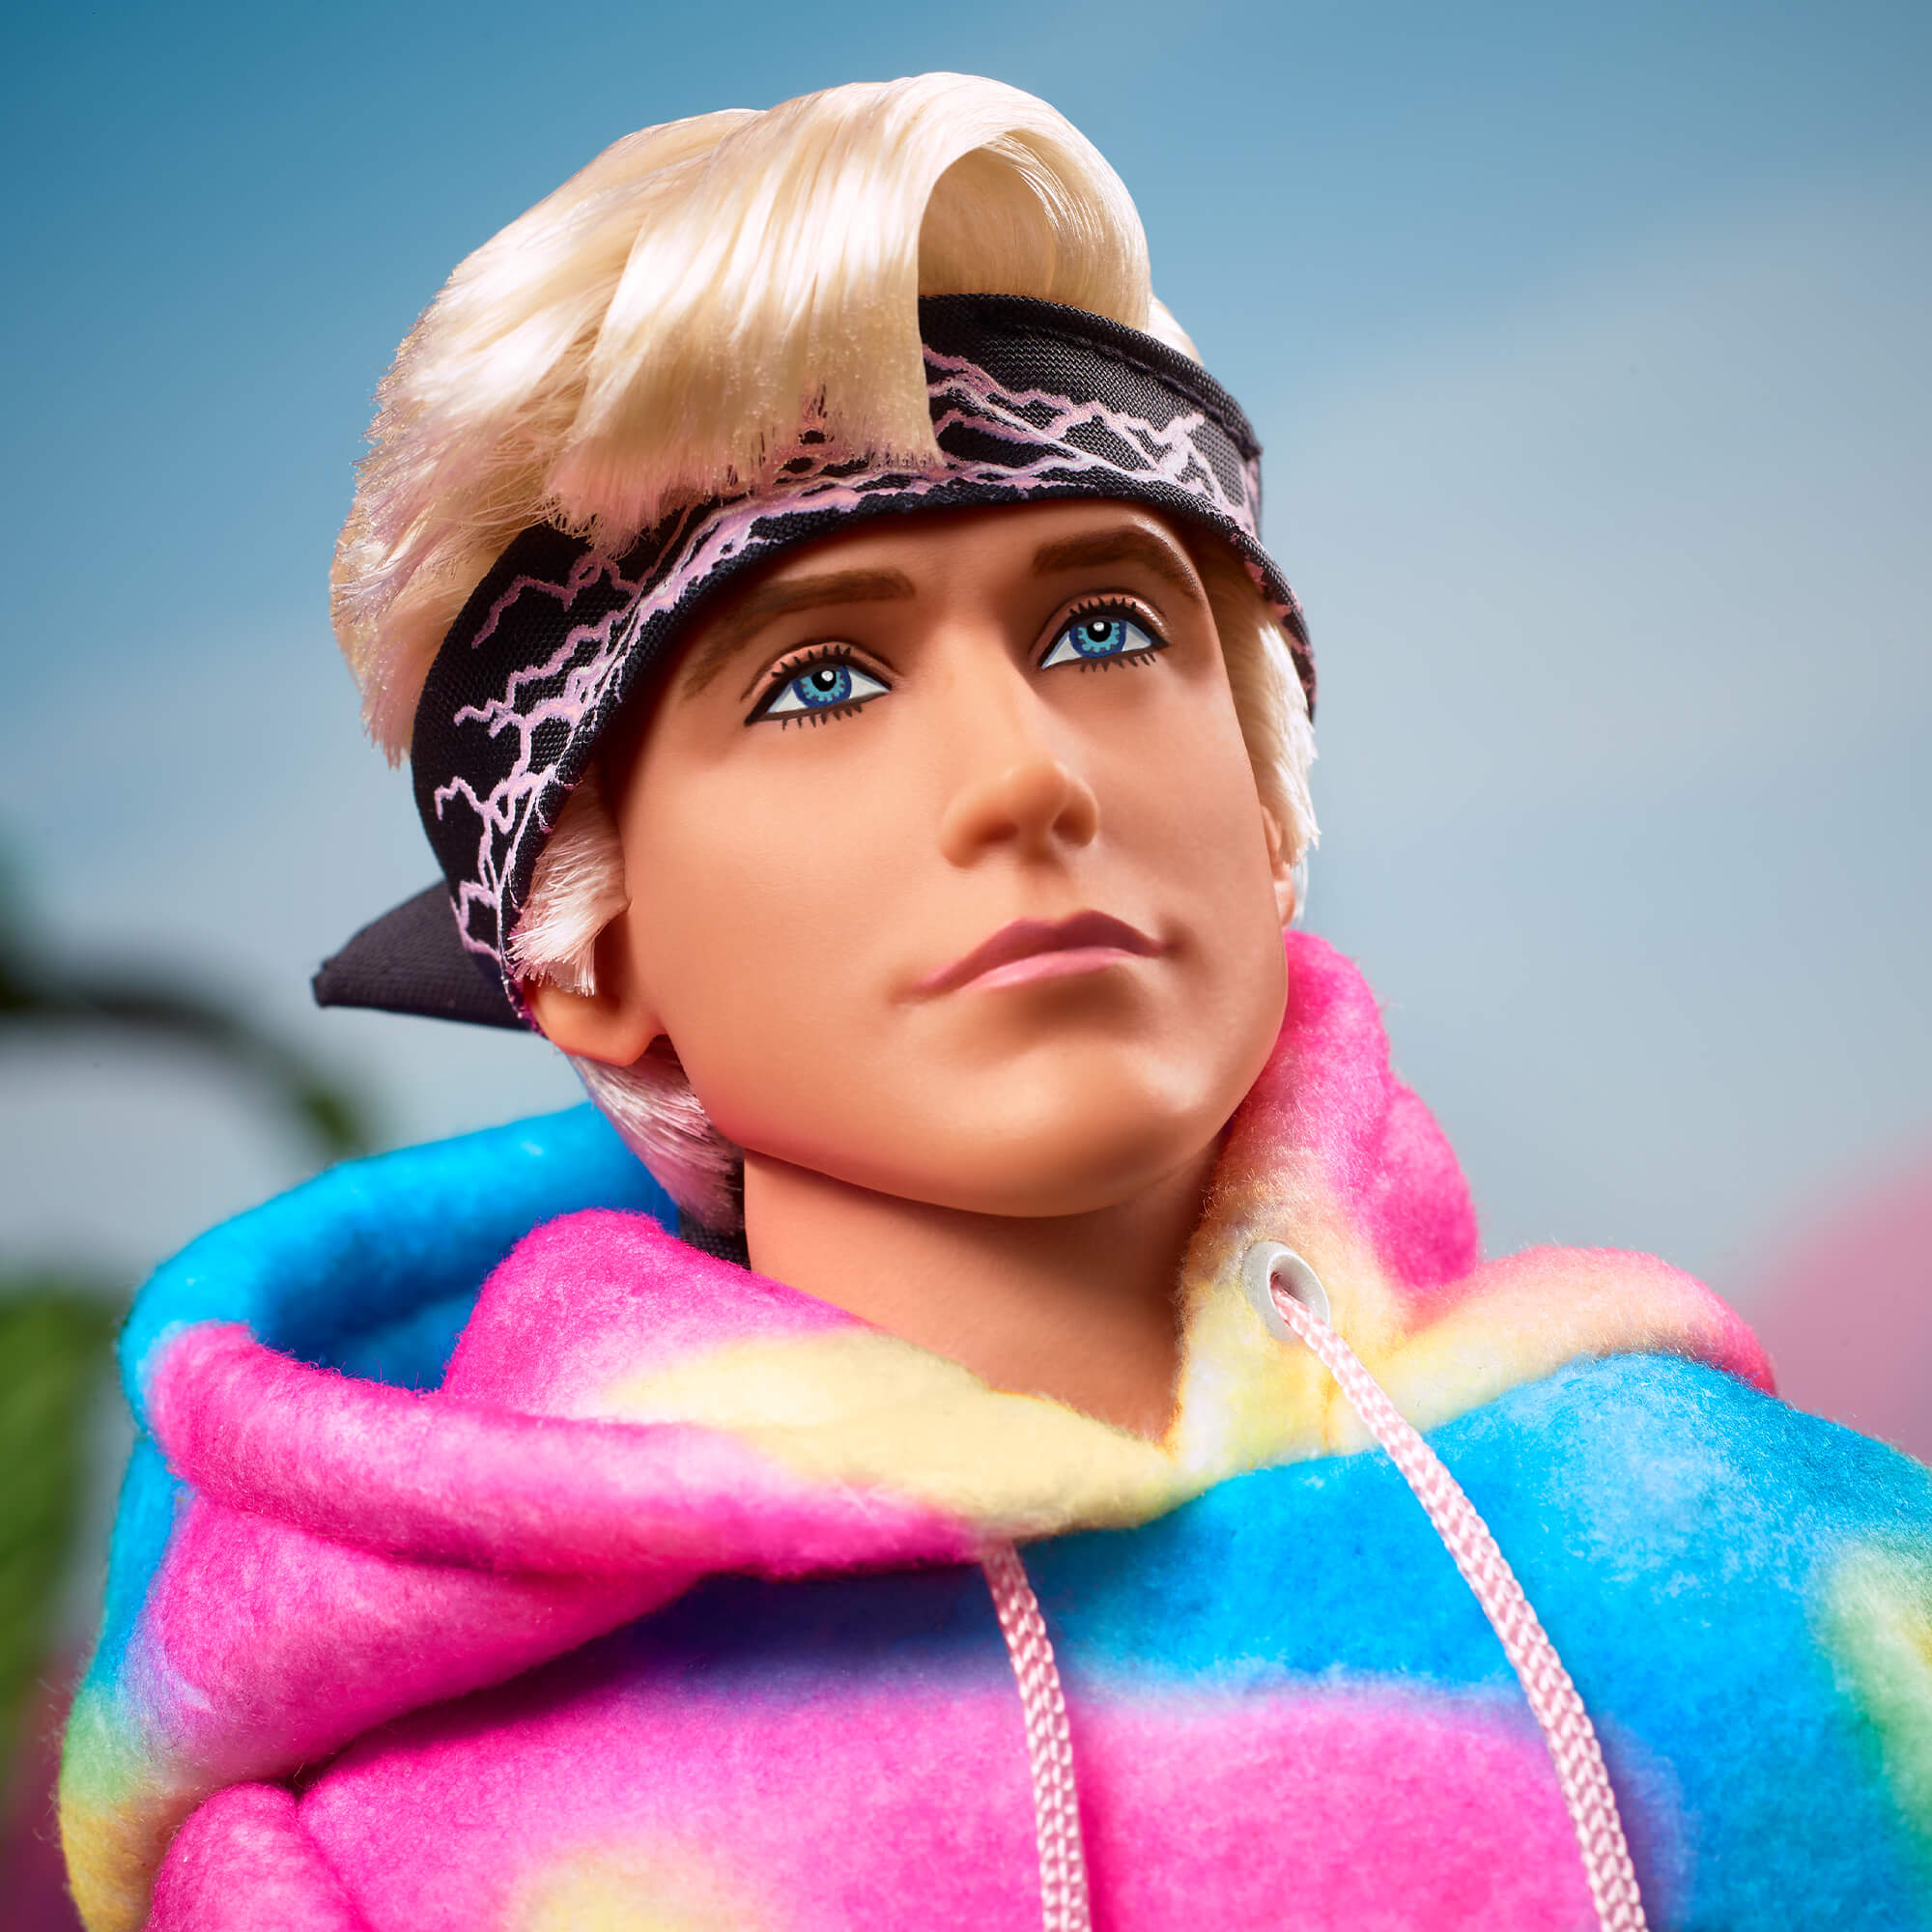 Where to Buy the 'I Am Kenough' Hoodie Online From the 'Barbie' Movie